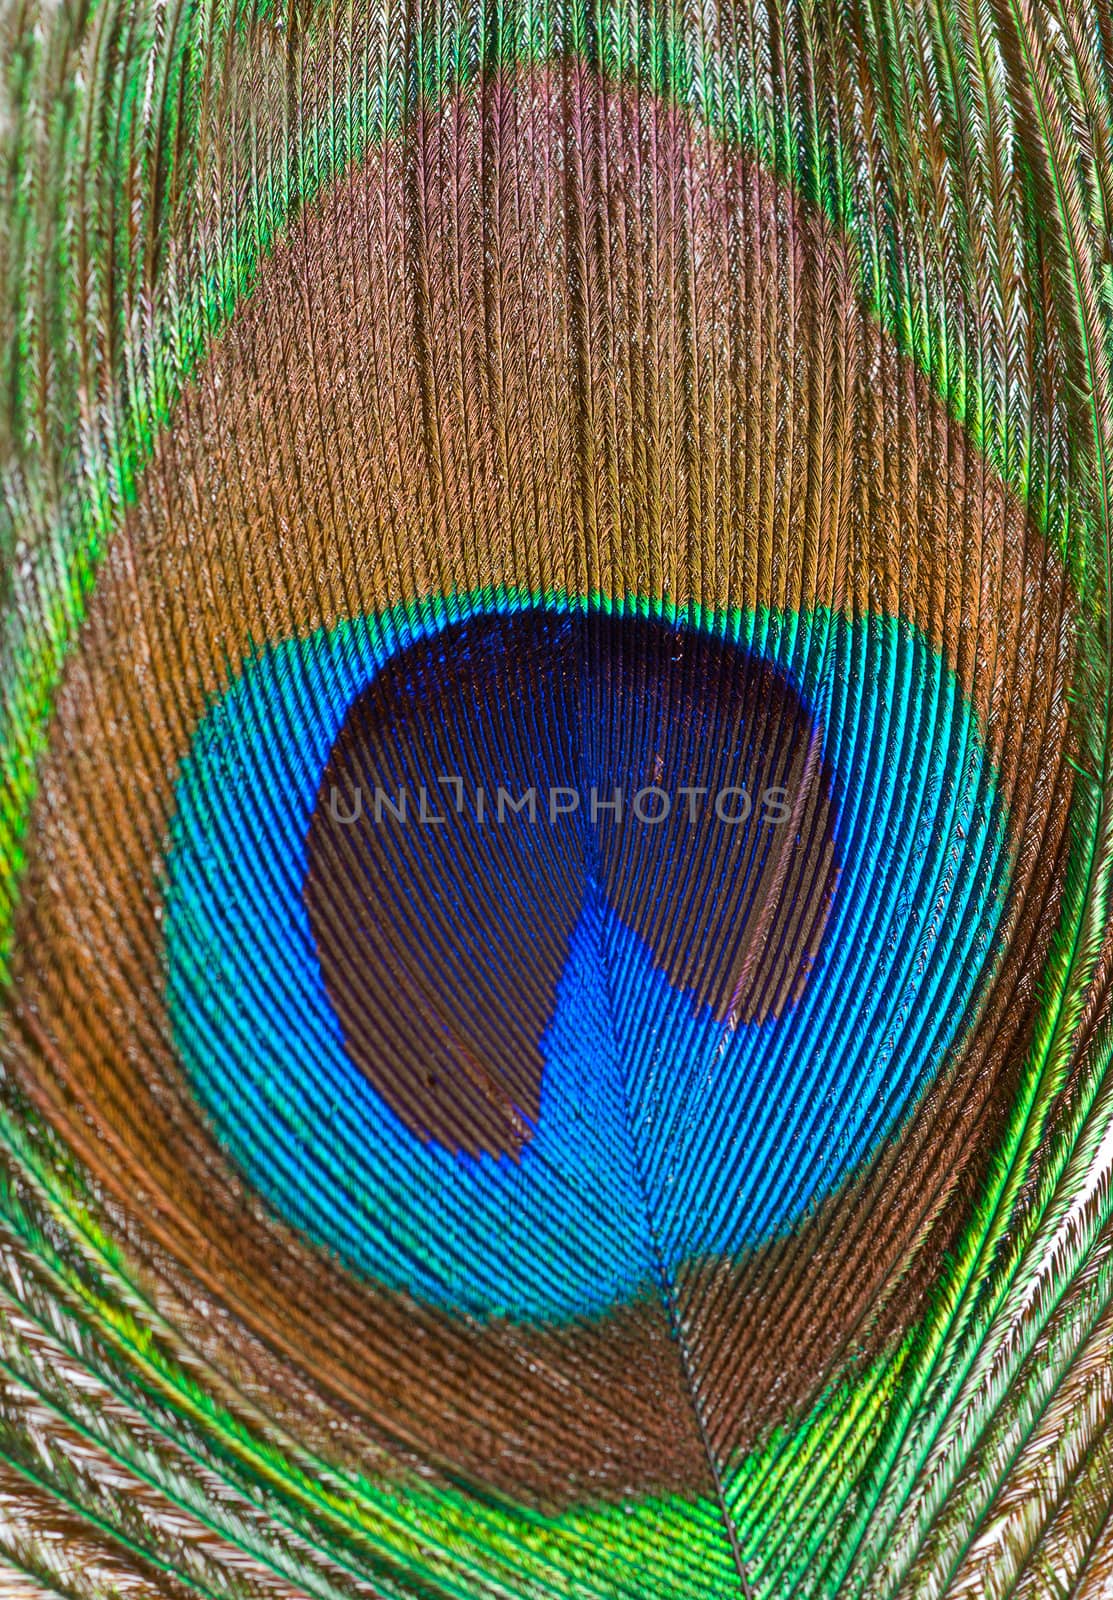 Peacock feather closeup by Givaga